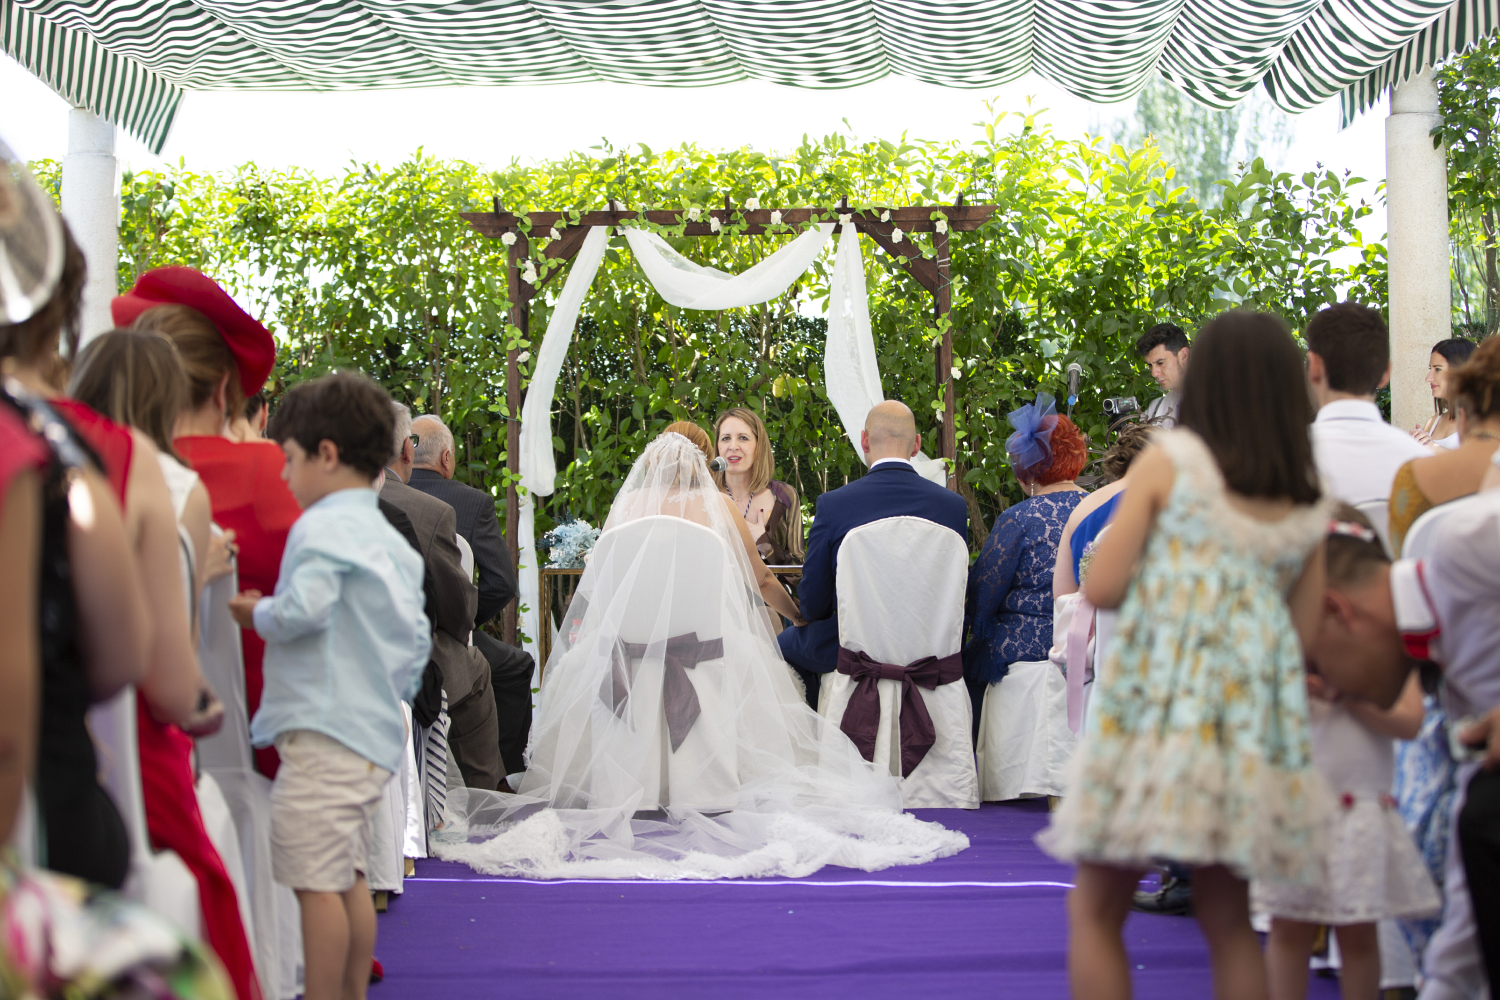 Discover our weddings